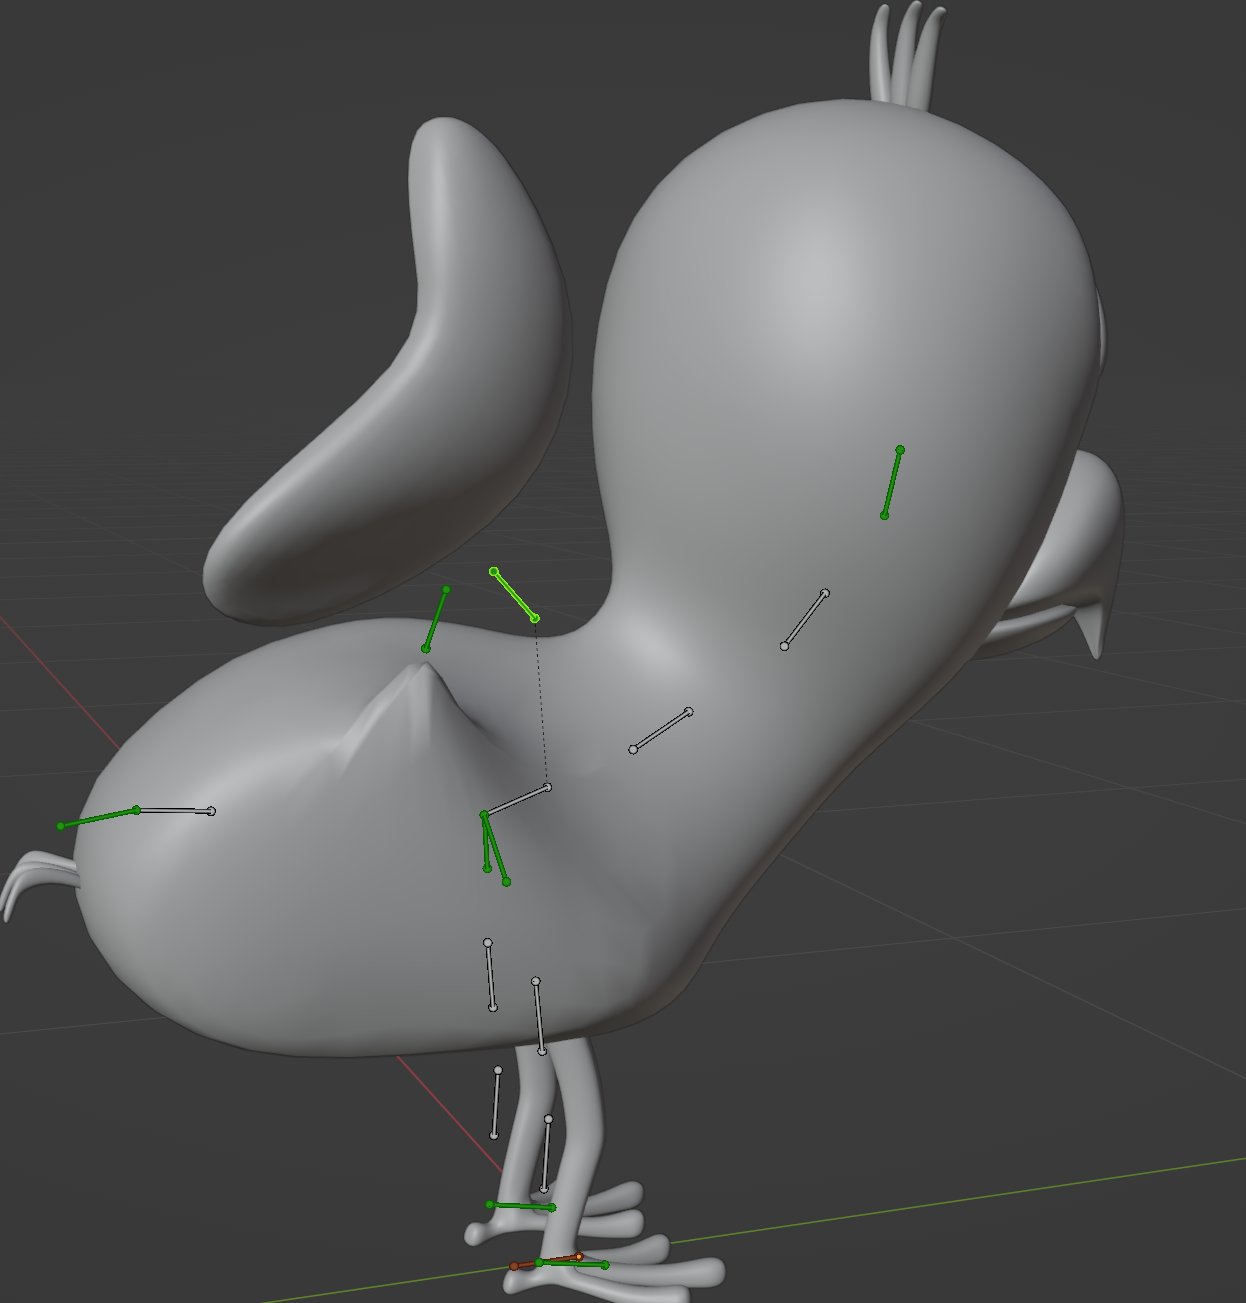 MLSpence on X: Opila birds model and UVs remains completely